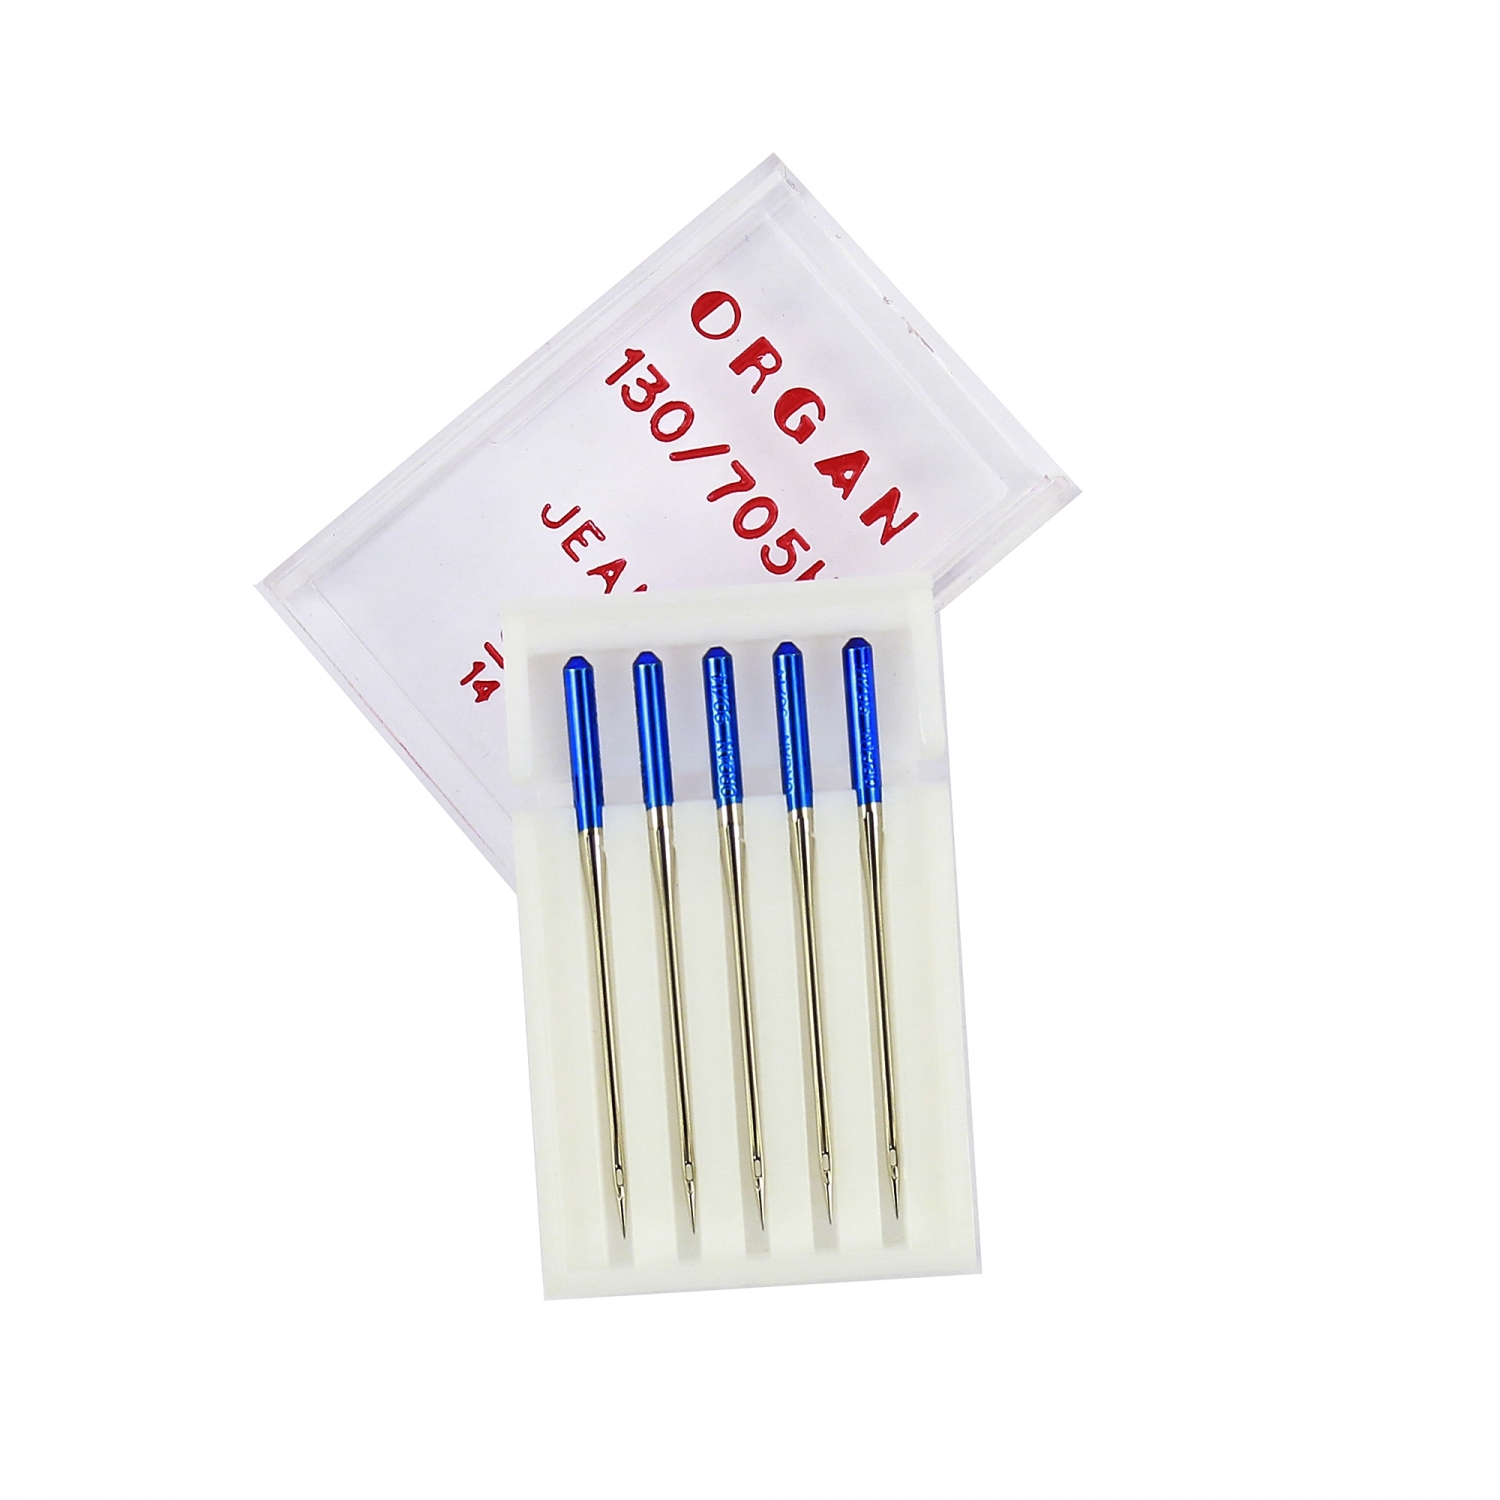 Household Sewing Jeans Machine Needles (5 pc/box)